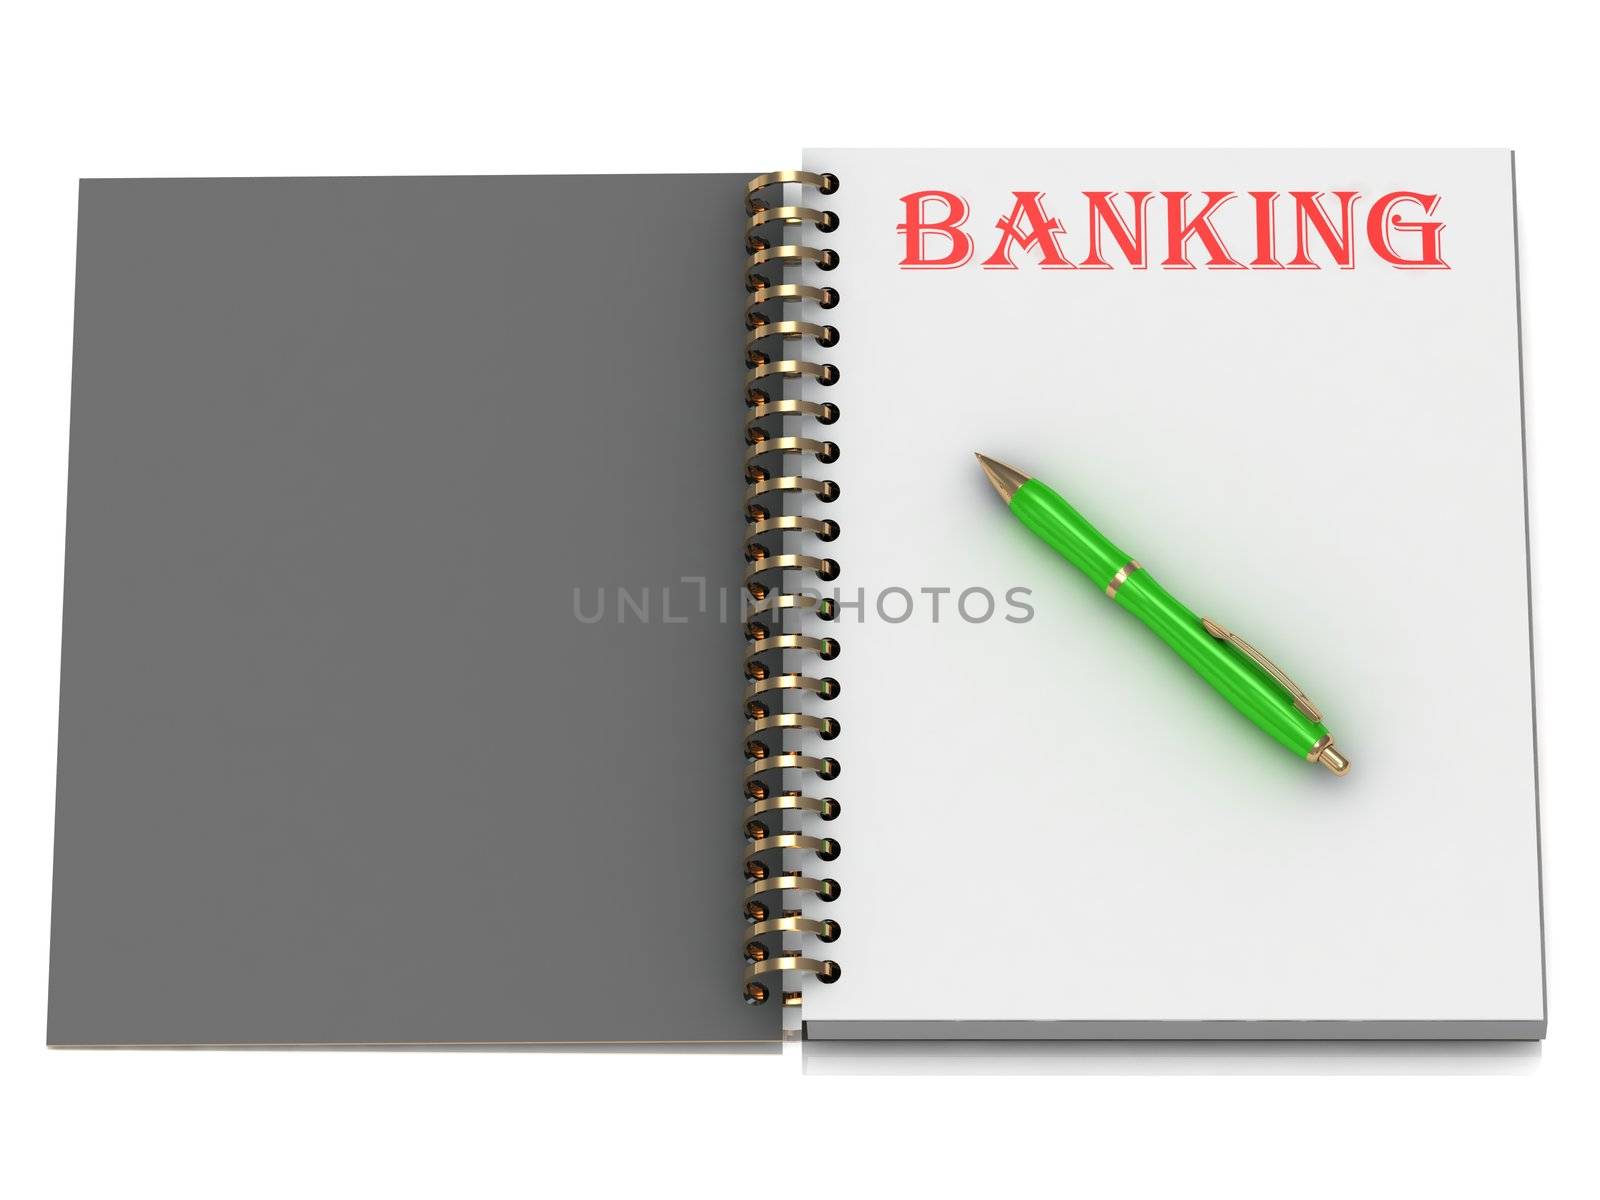 BANKING inscription on notebook page by GreenMost